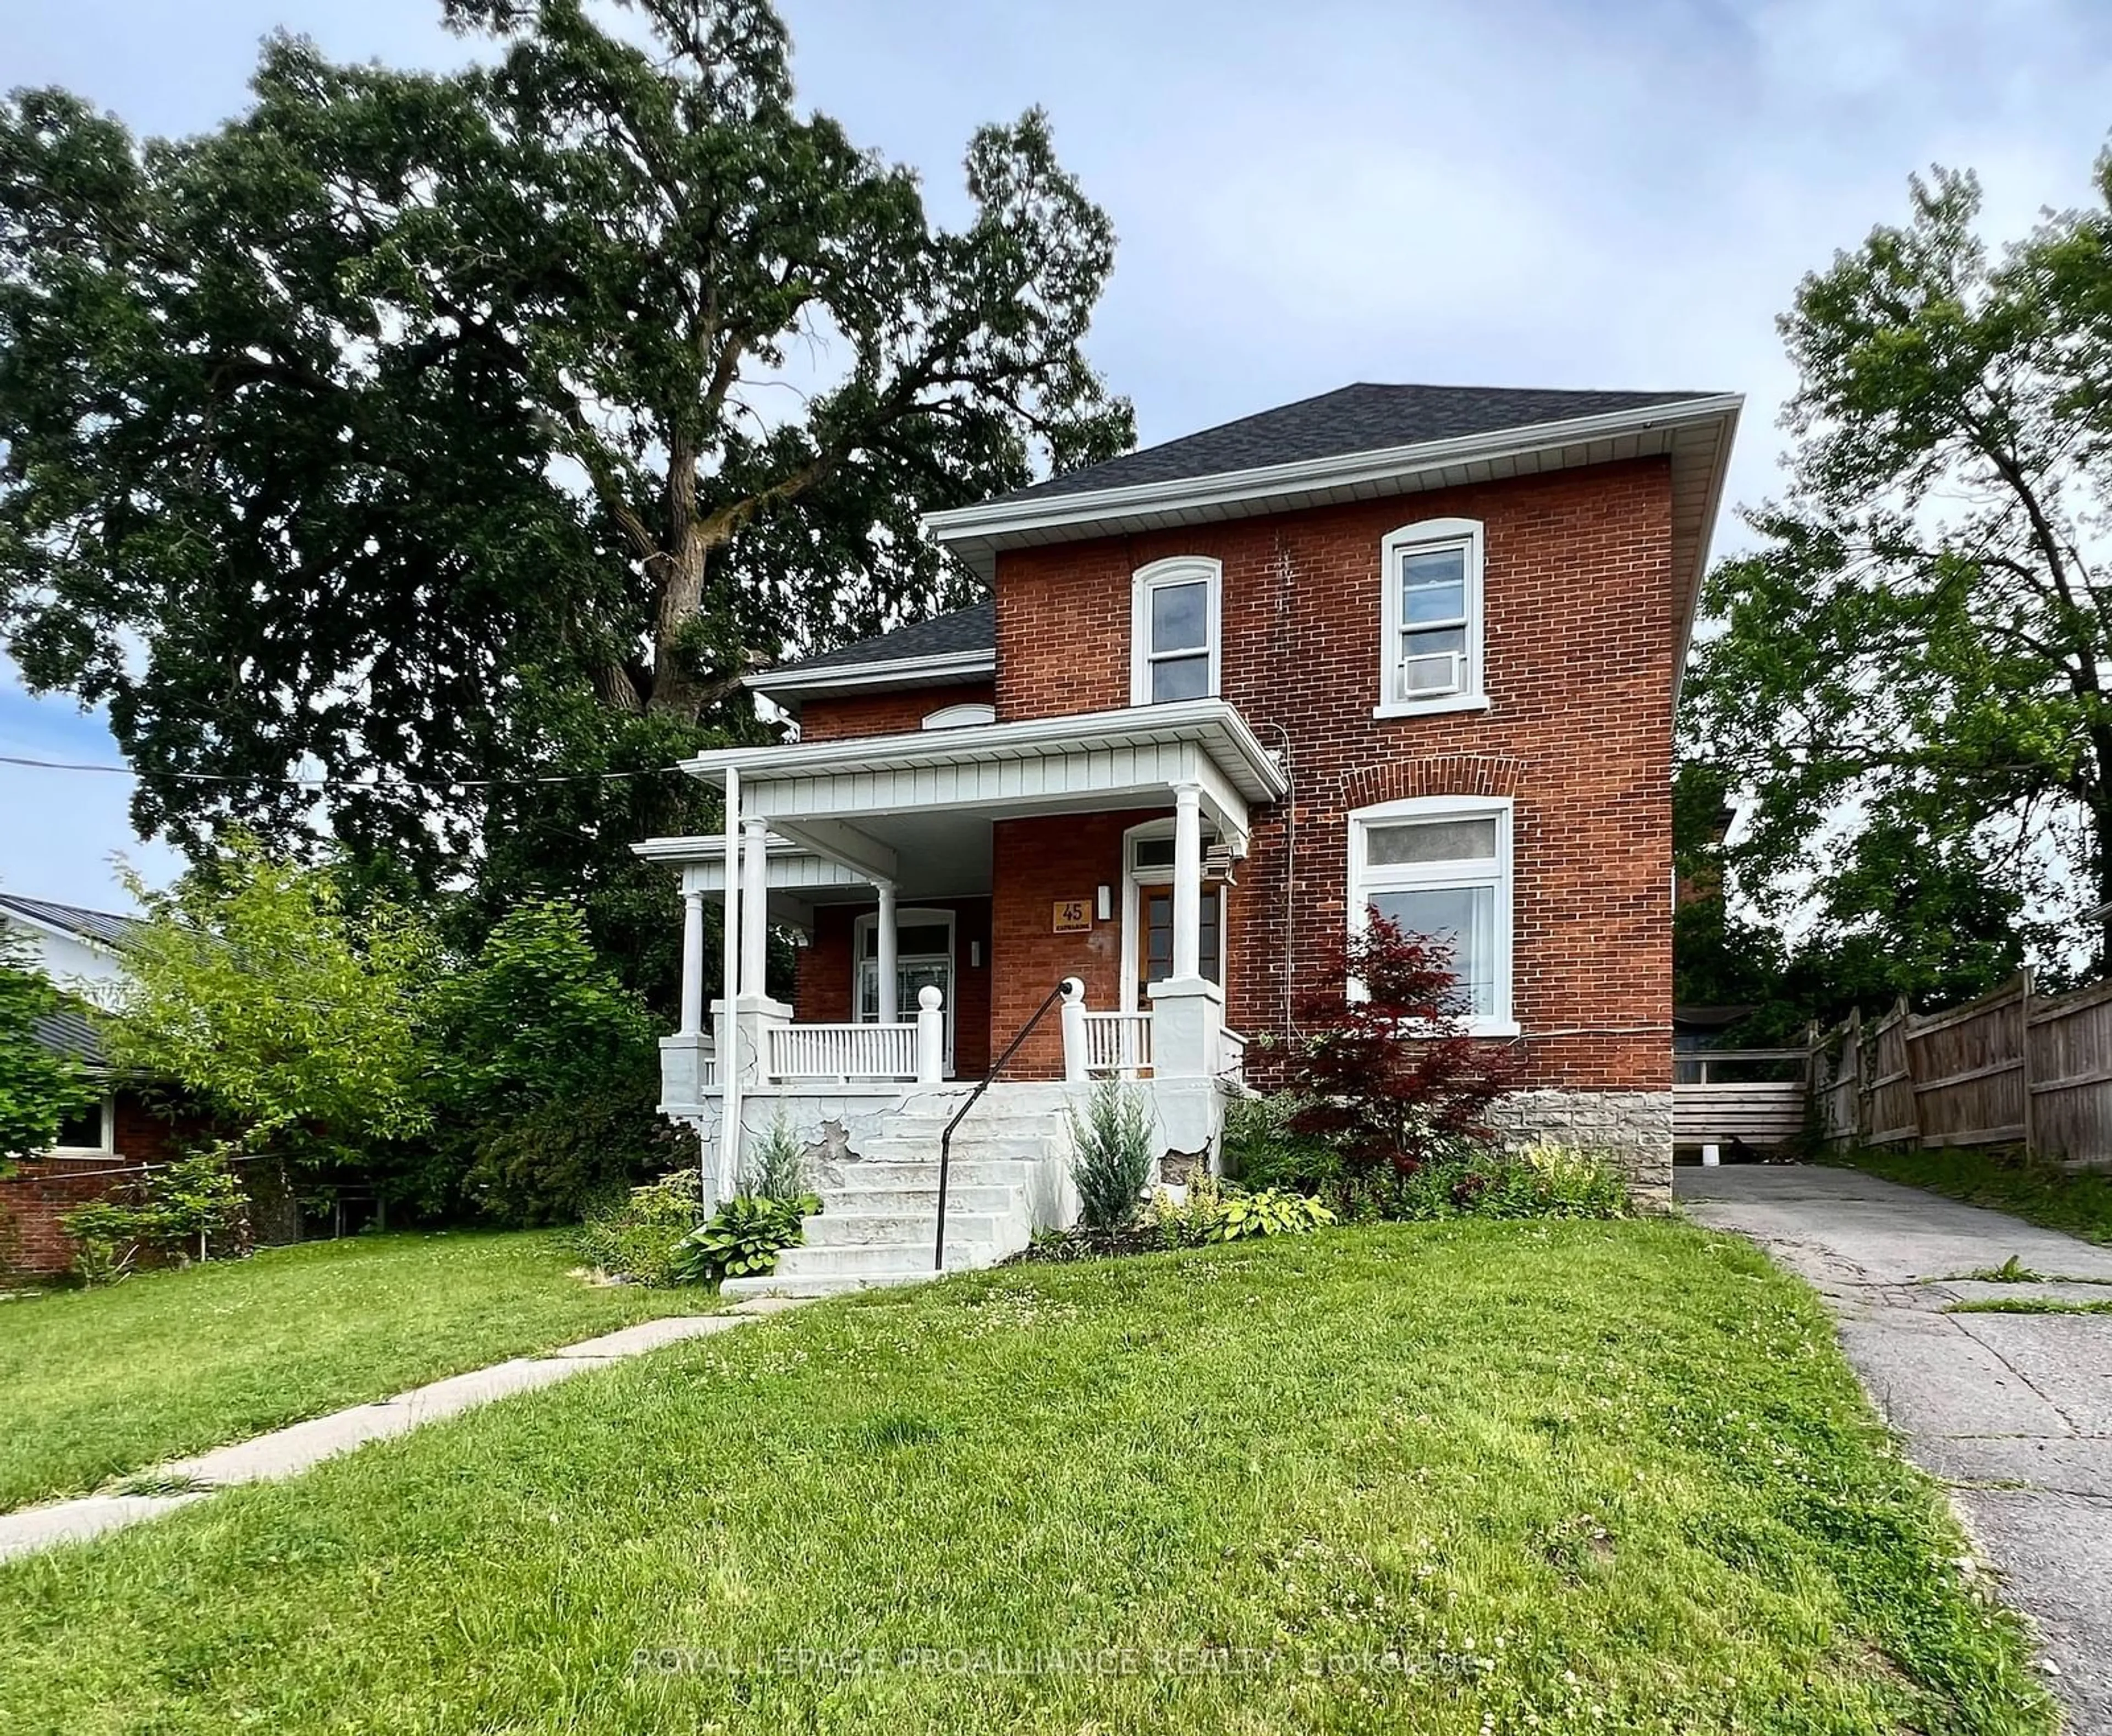 Home with brick exterior material for 45 Catharine St, Belleville Ontario K8P 1L6